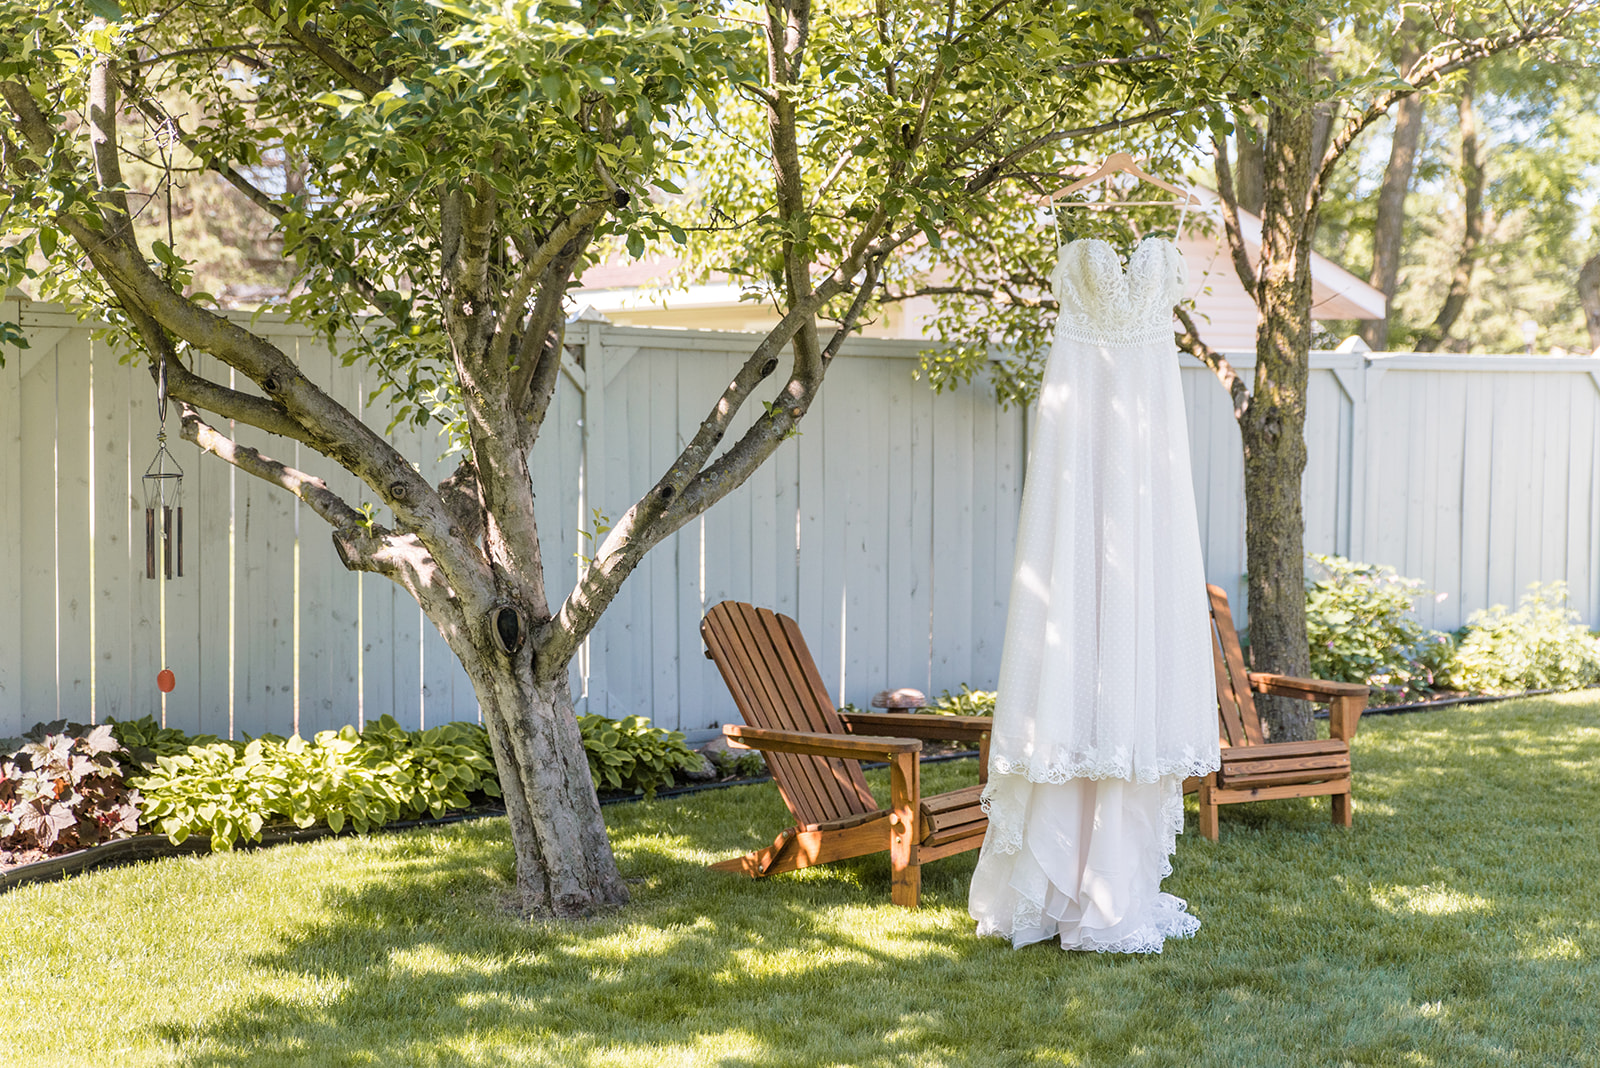 A wedding dress hangs from a tree with spring leaves and two adirondack chairs in the background